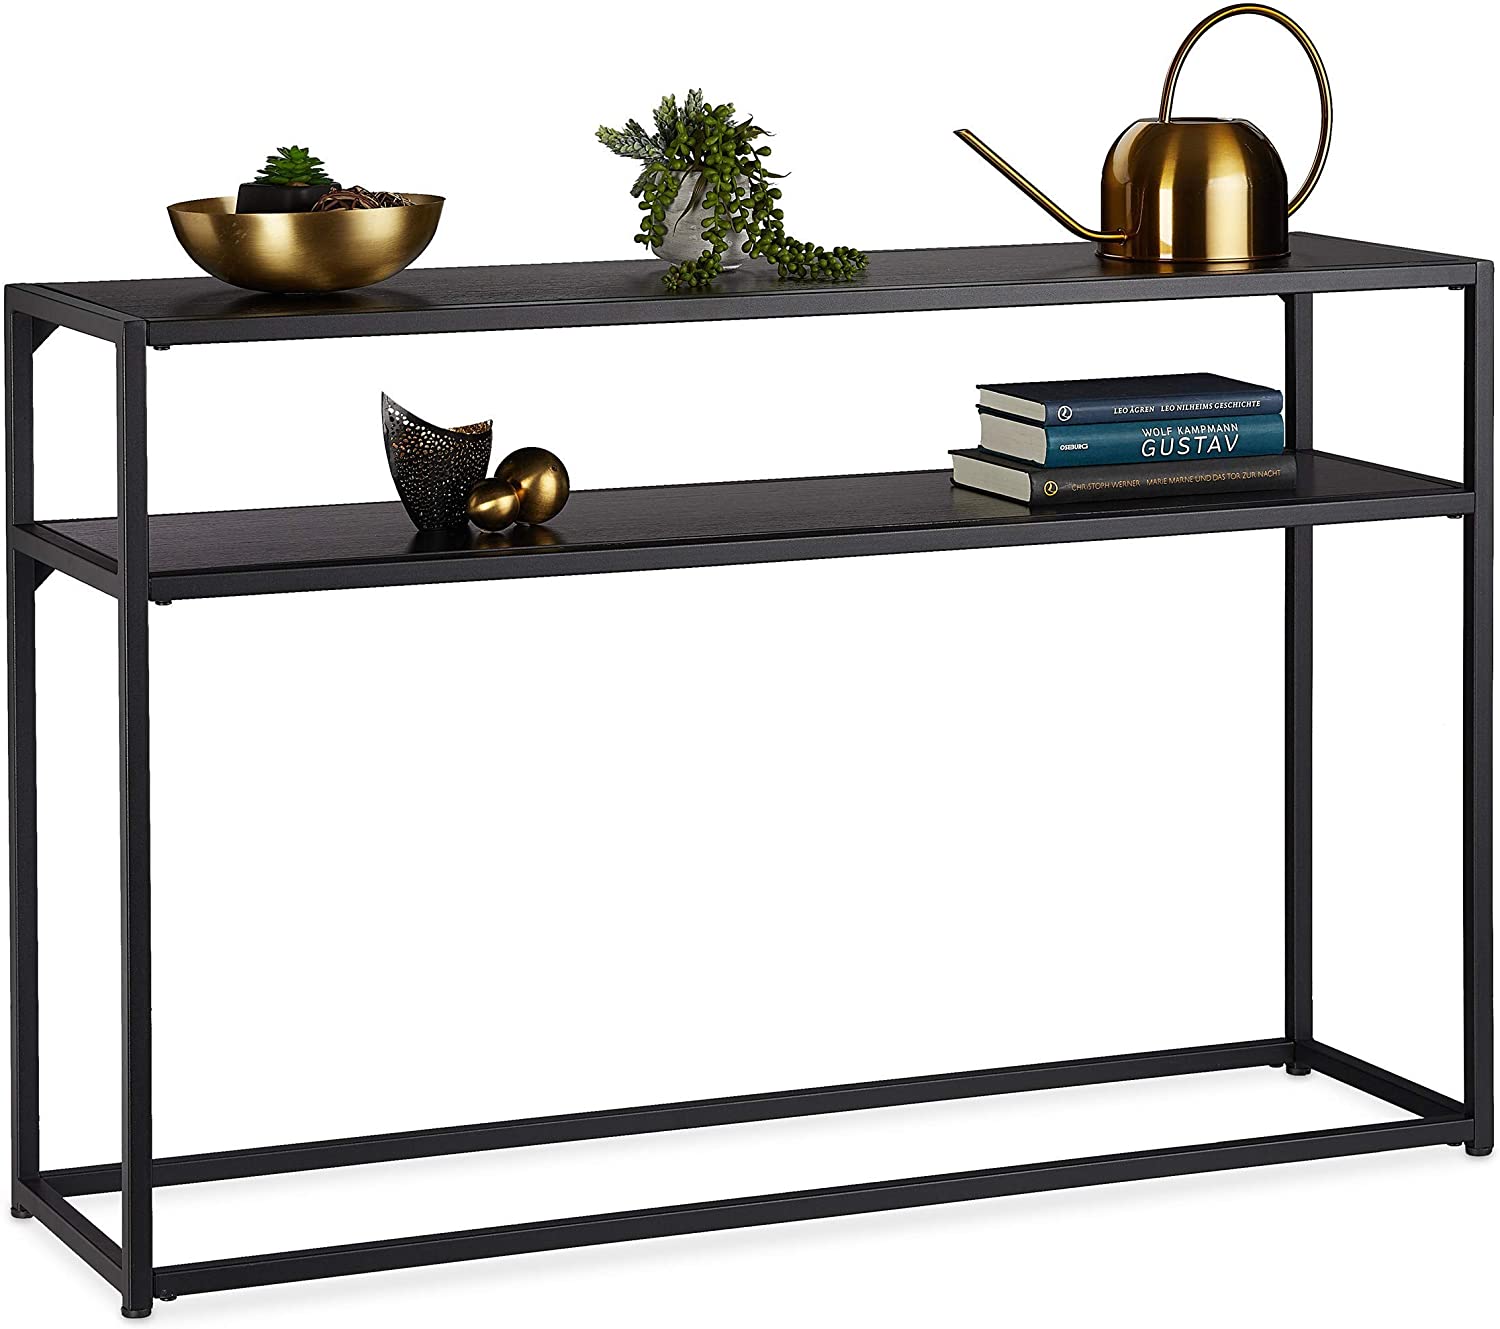 Relaxdays Console Table 2 Shelves Metal & Mdf Space Saving Slim Side Table 